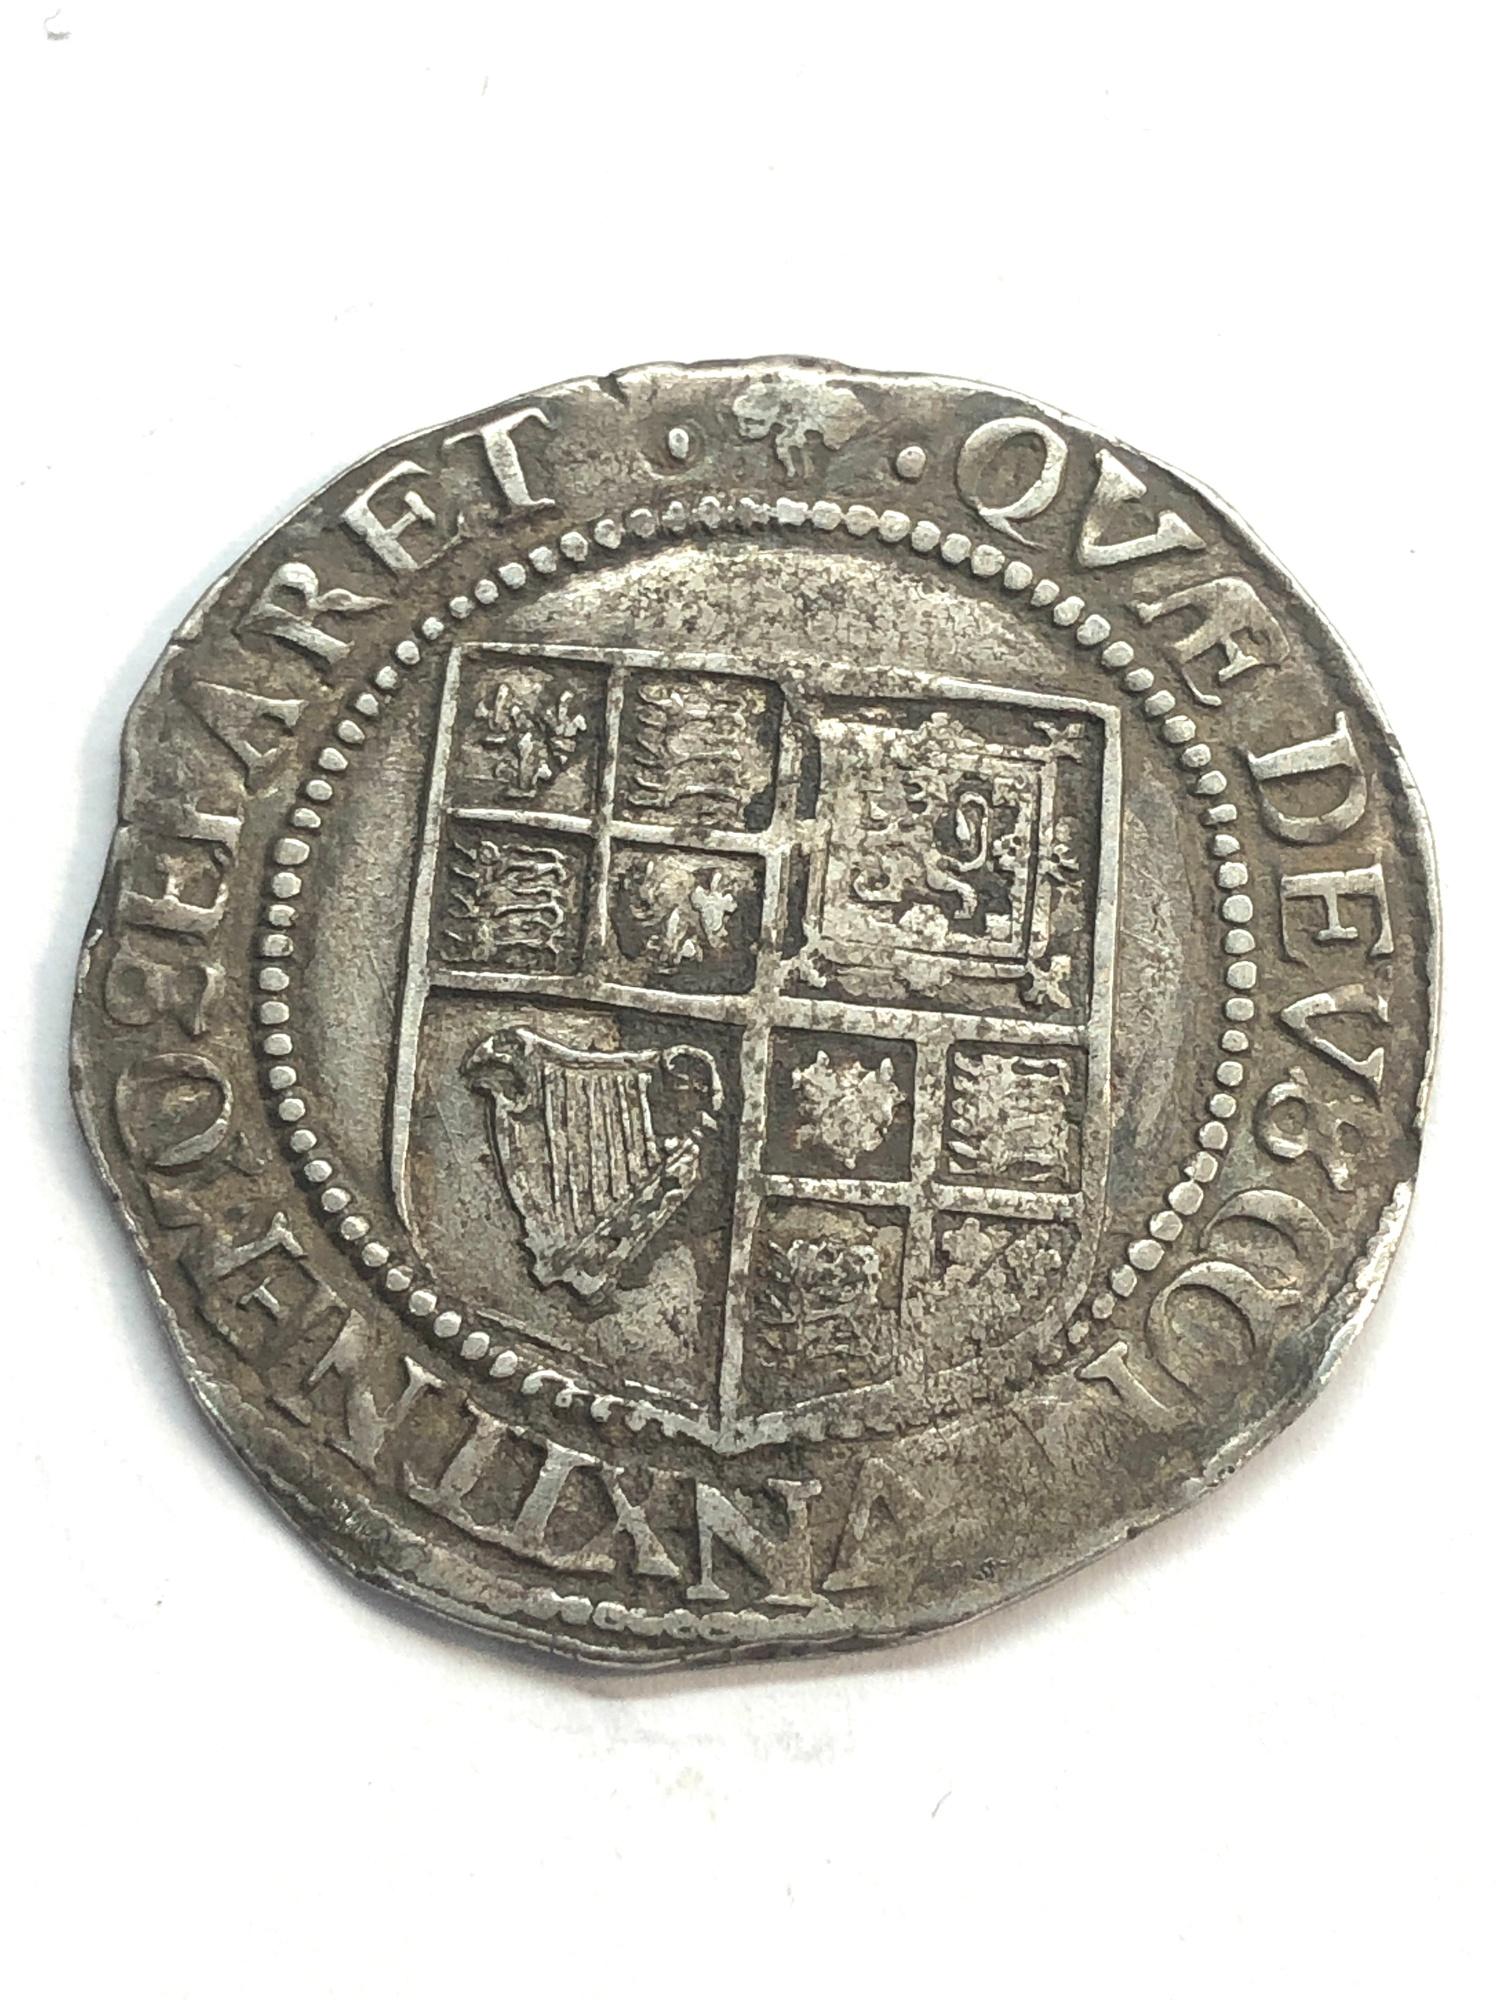 James 1st 1603-25 silver coin measures approx 31mm dia weight 6.0g please see images for grade and - Image 2 of 2